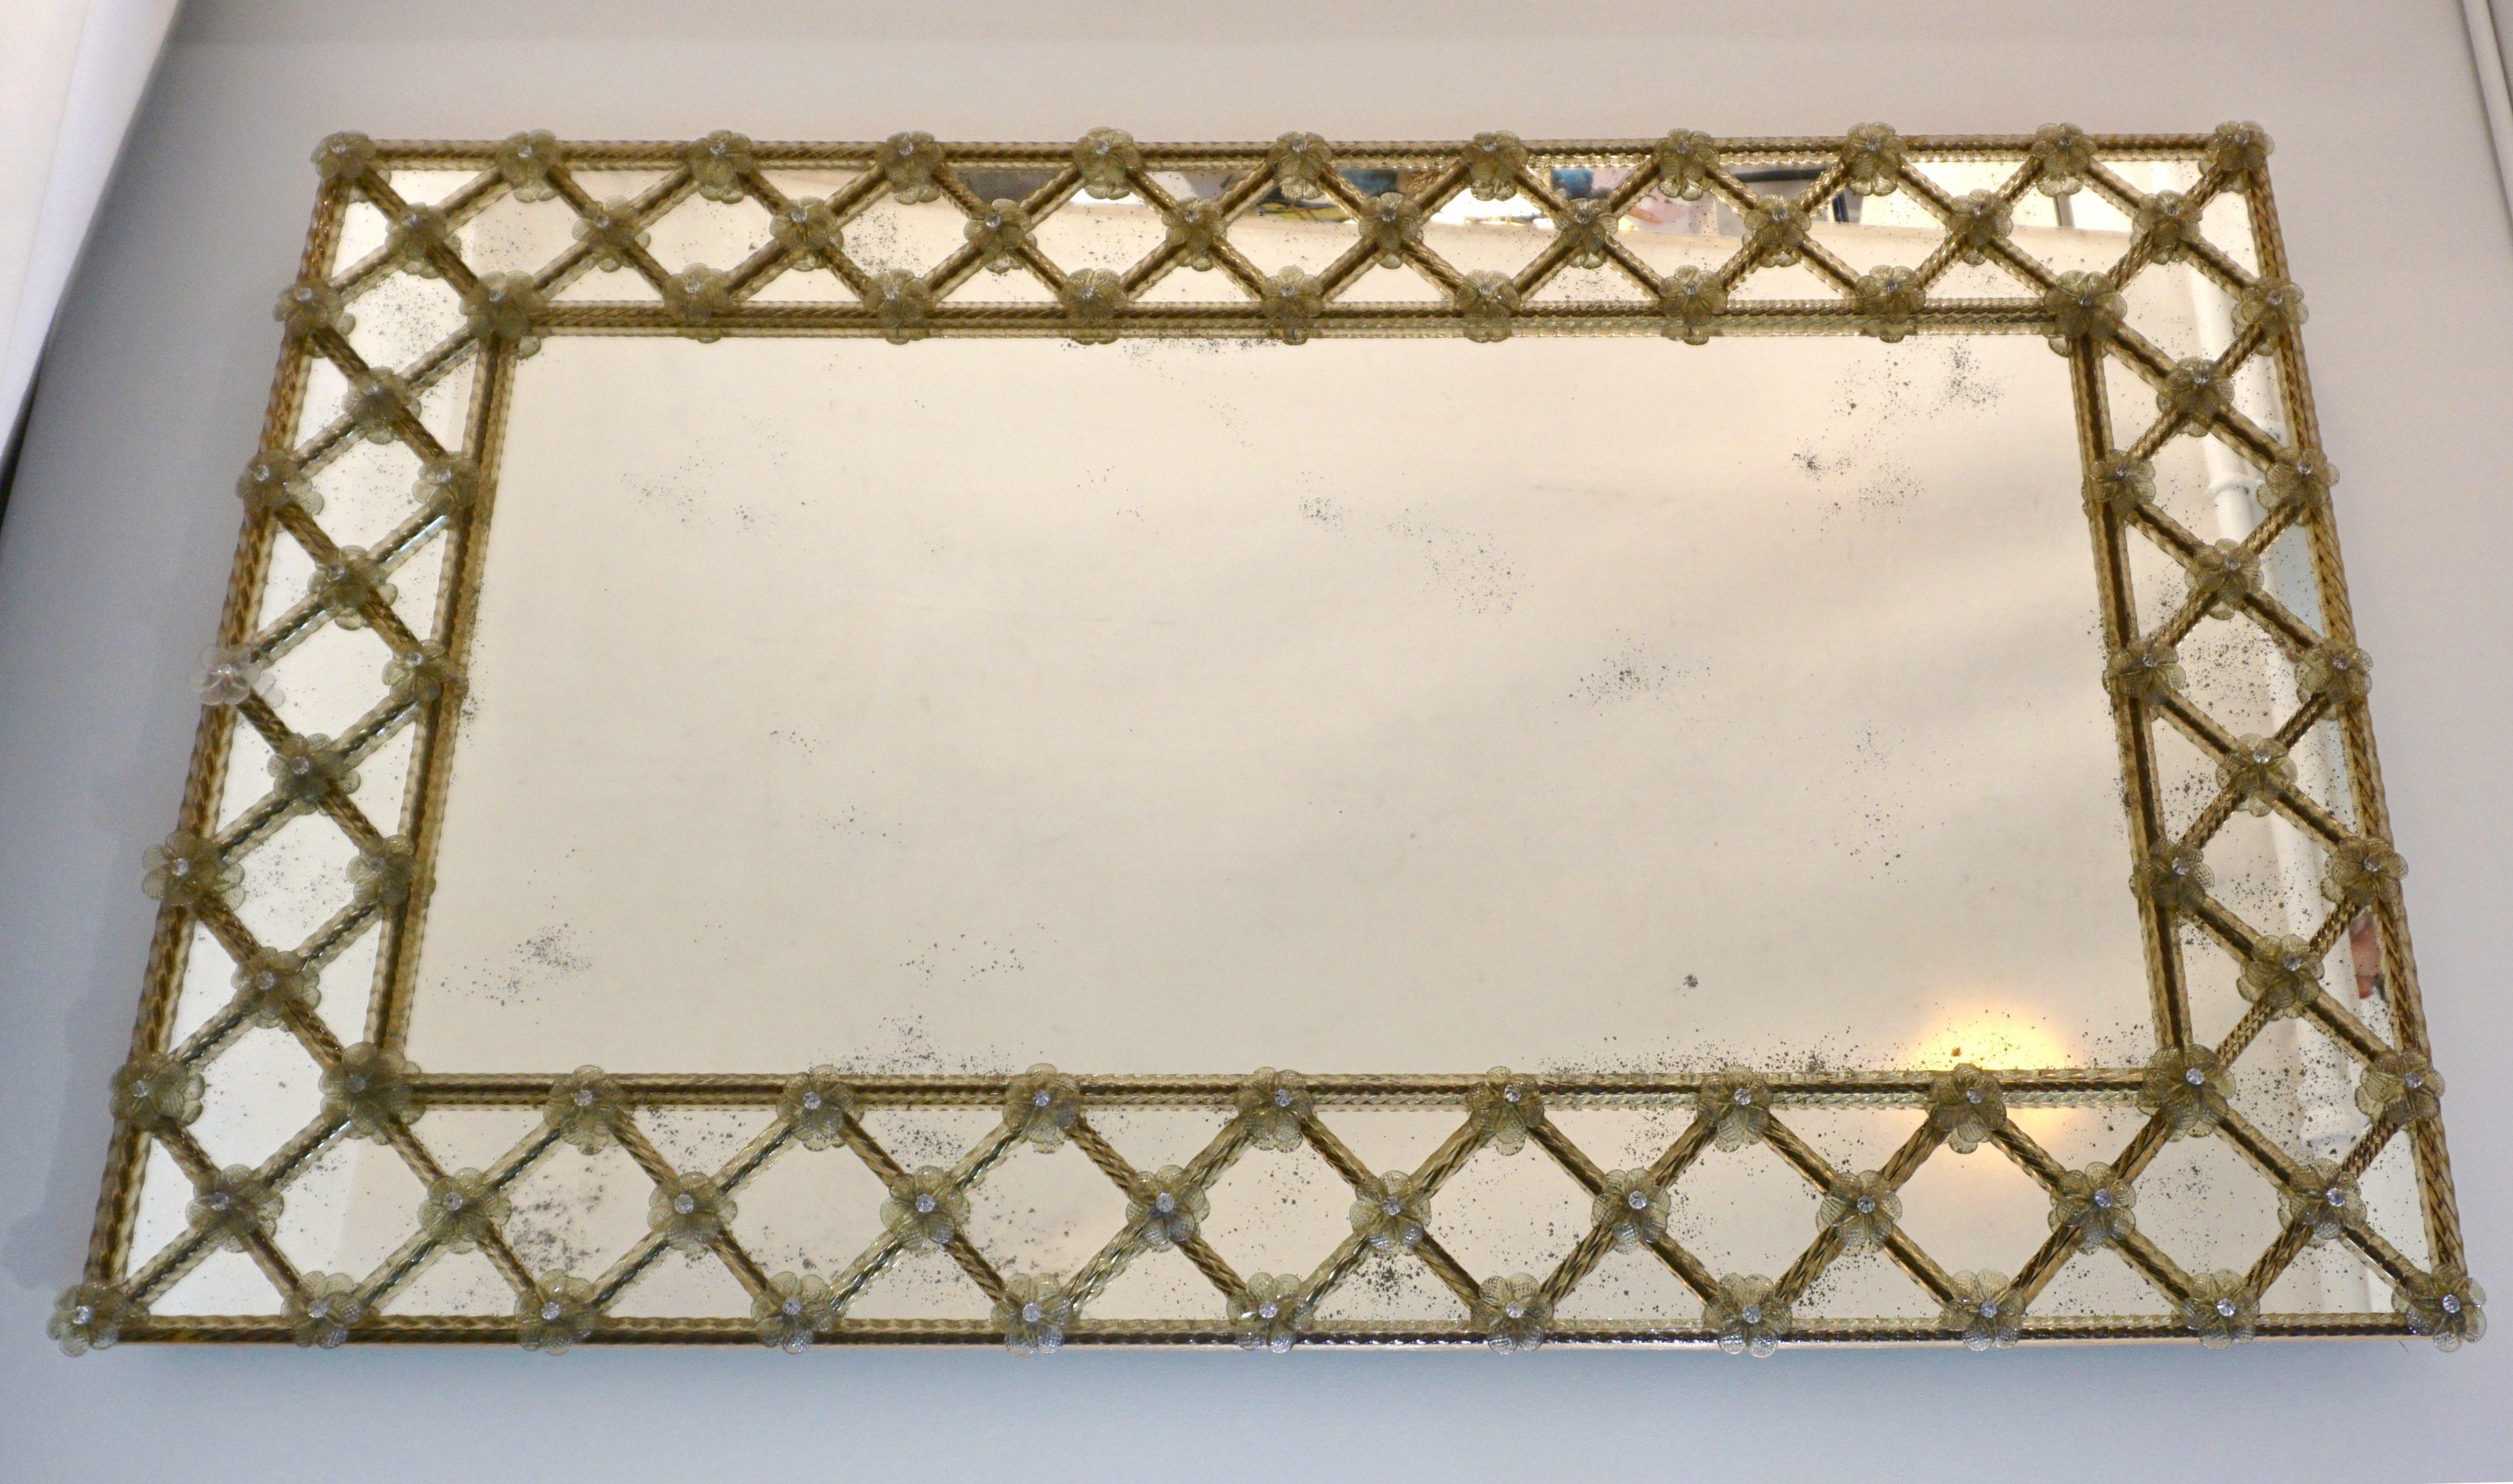 Venetian rectangular mirror, entirely handcrafted in Italy, a contemporary creation from an original design of the early 20th century, high quality of construction with hand gilt edged wooden back. The mirrored plate is enclosed in a mirror frame